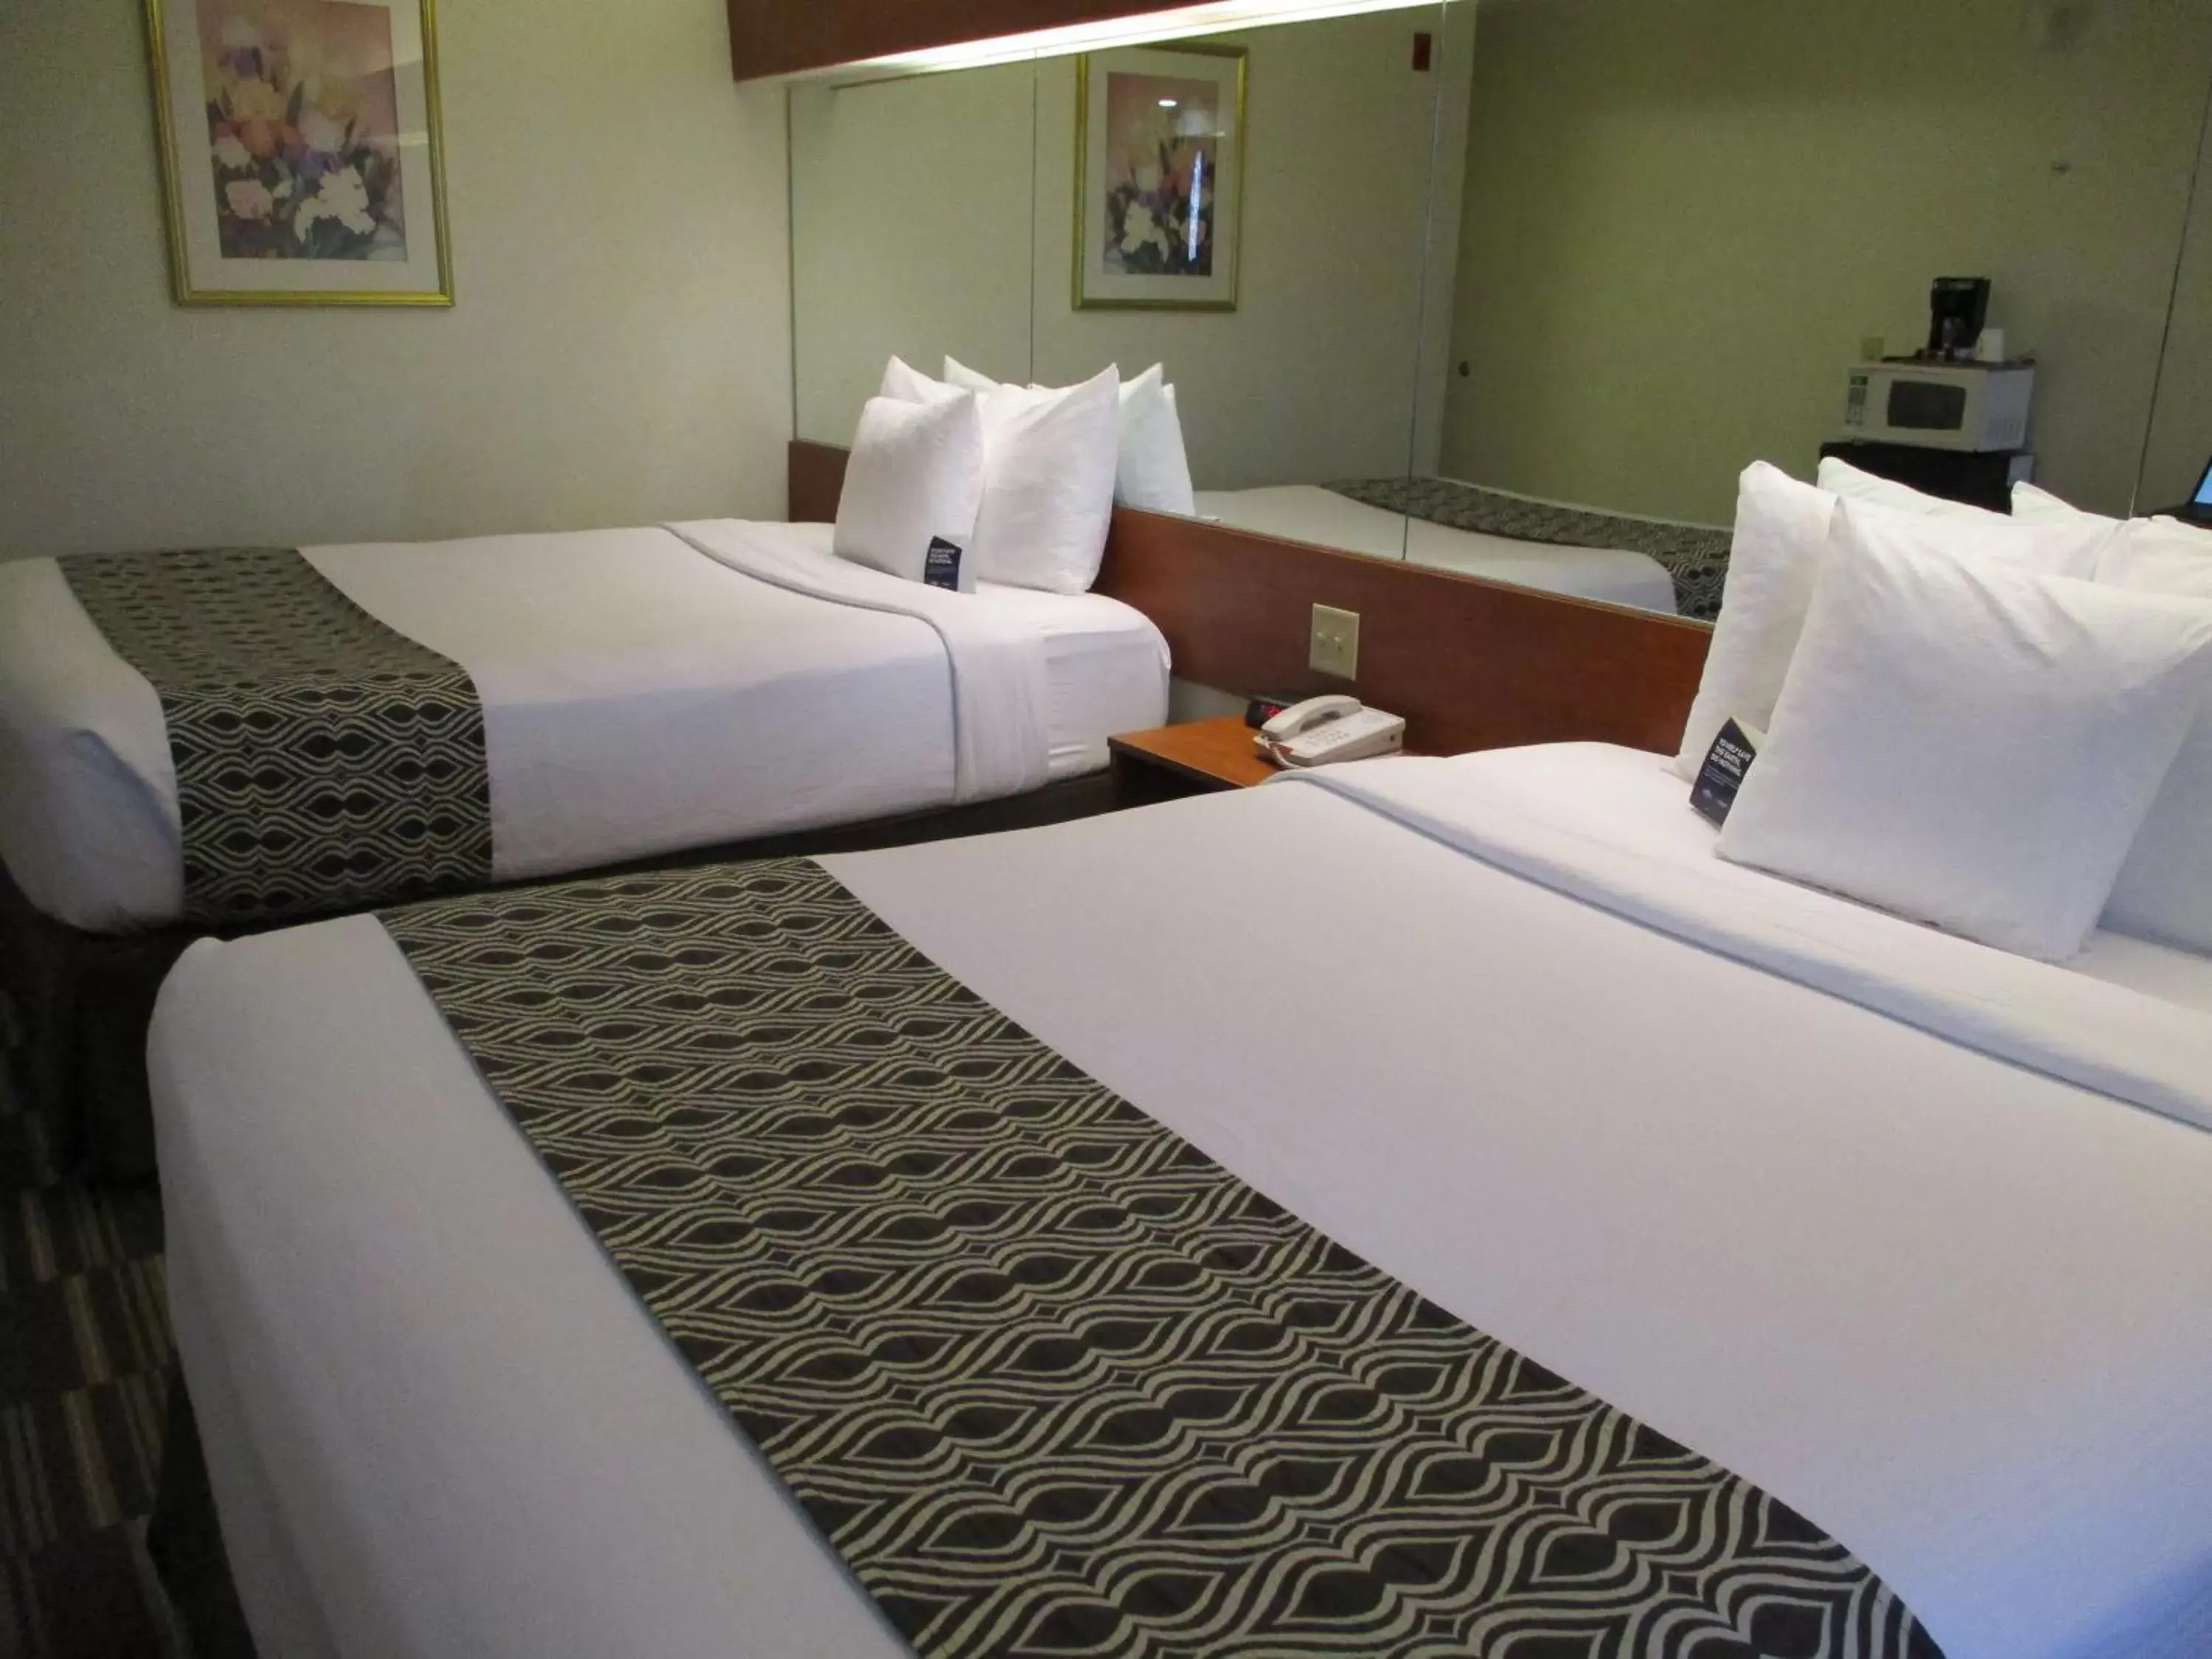 Bed in Microtel Inn and Suites - Inver Grove Heights